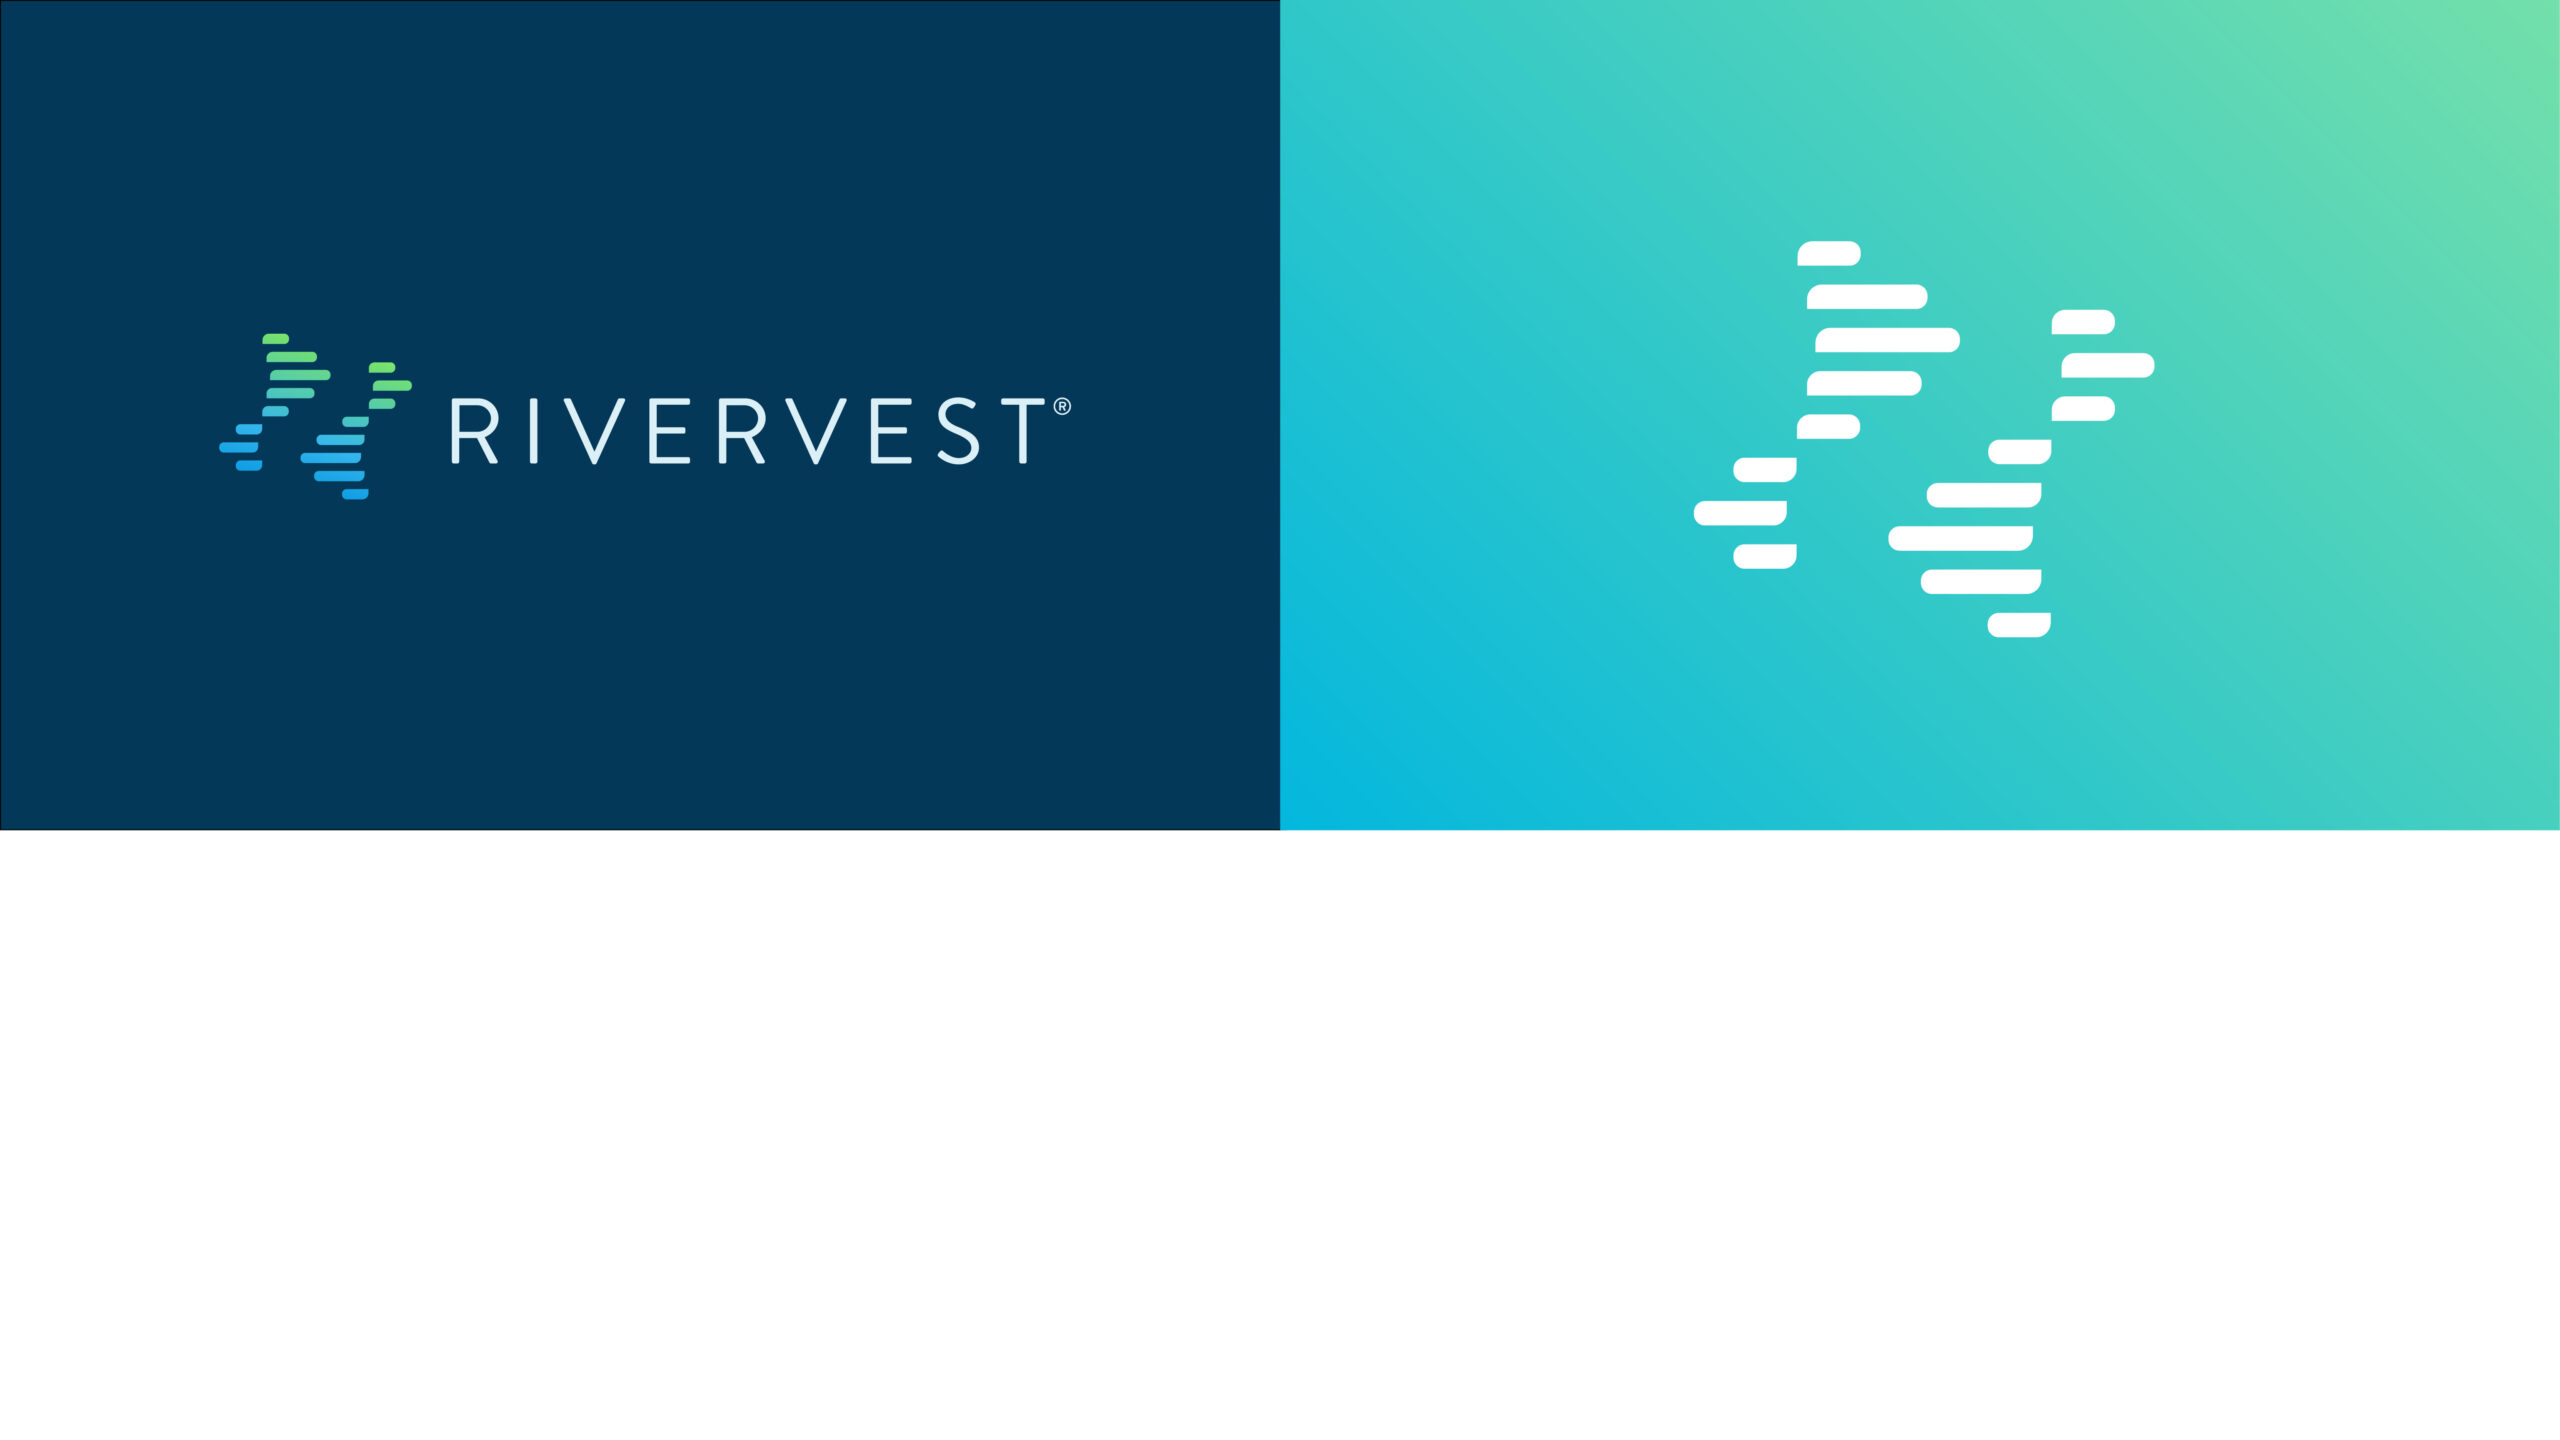 RiverVest brand identity and icon